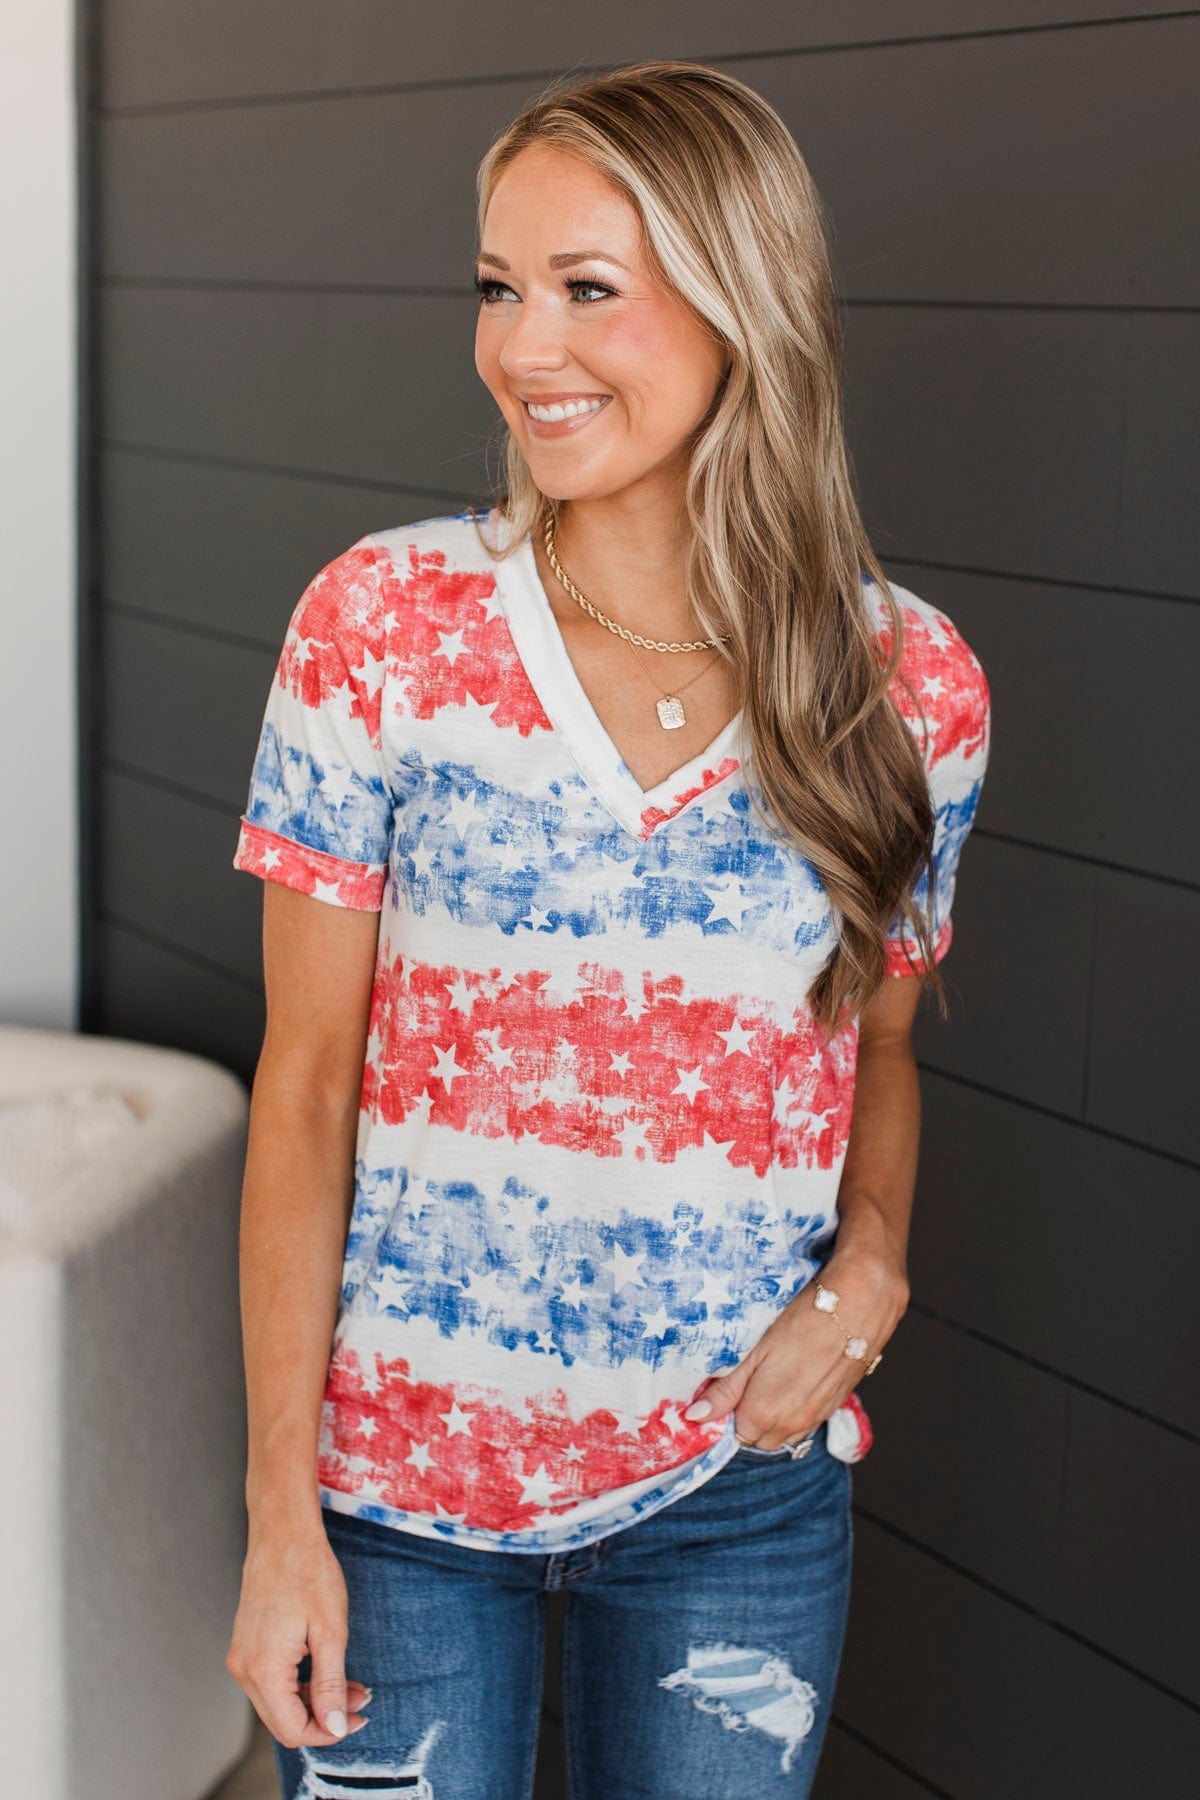 Follow The Stars V-Neck Top- Red, White, & Blue